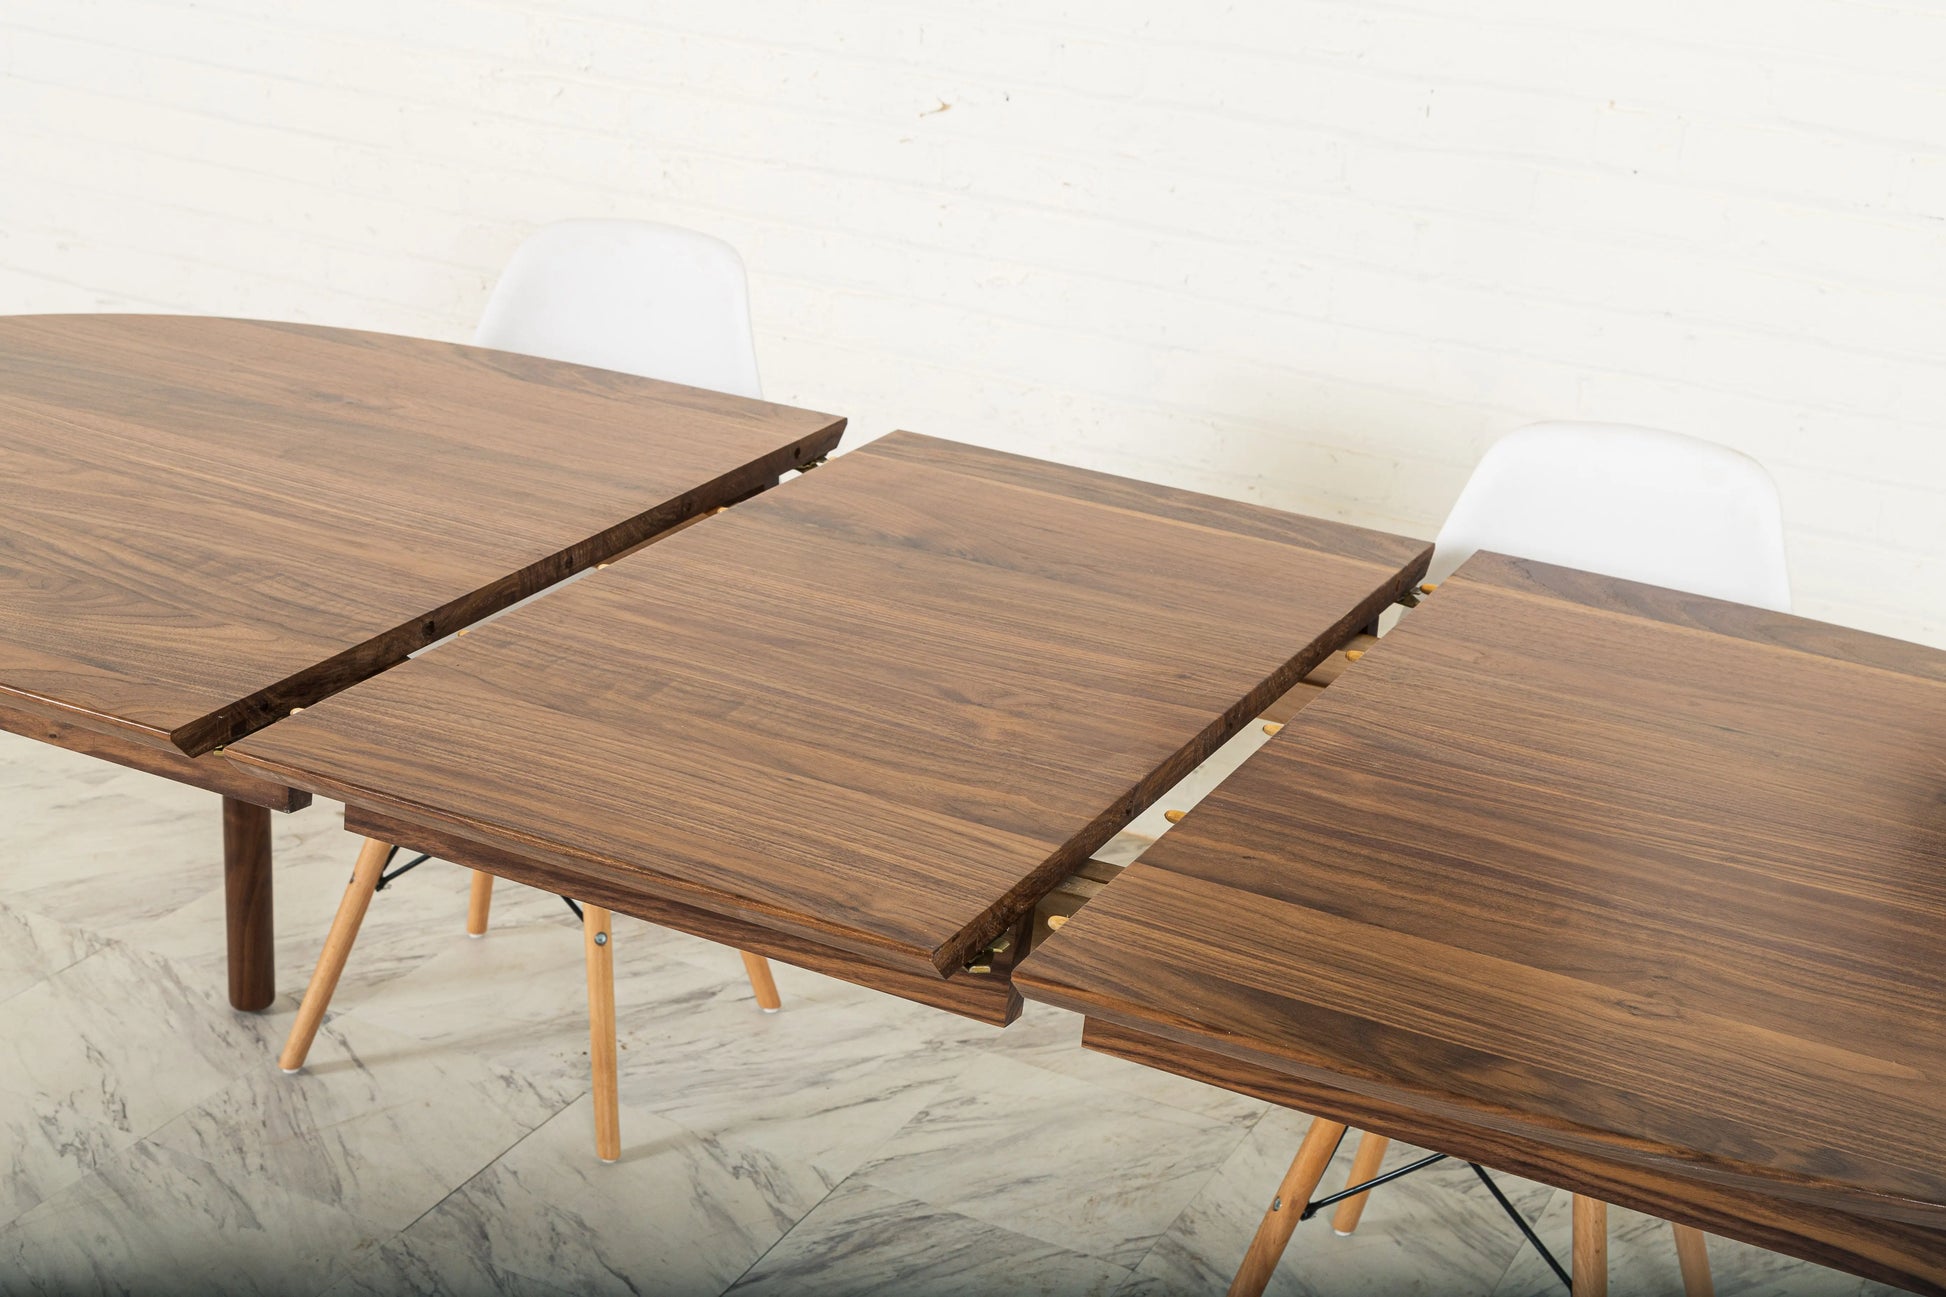 Walnut Extendable Oval Dining Table "The Payne"- In Stock Moderncre8ve